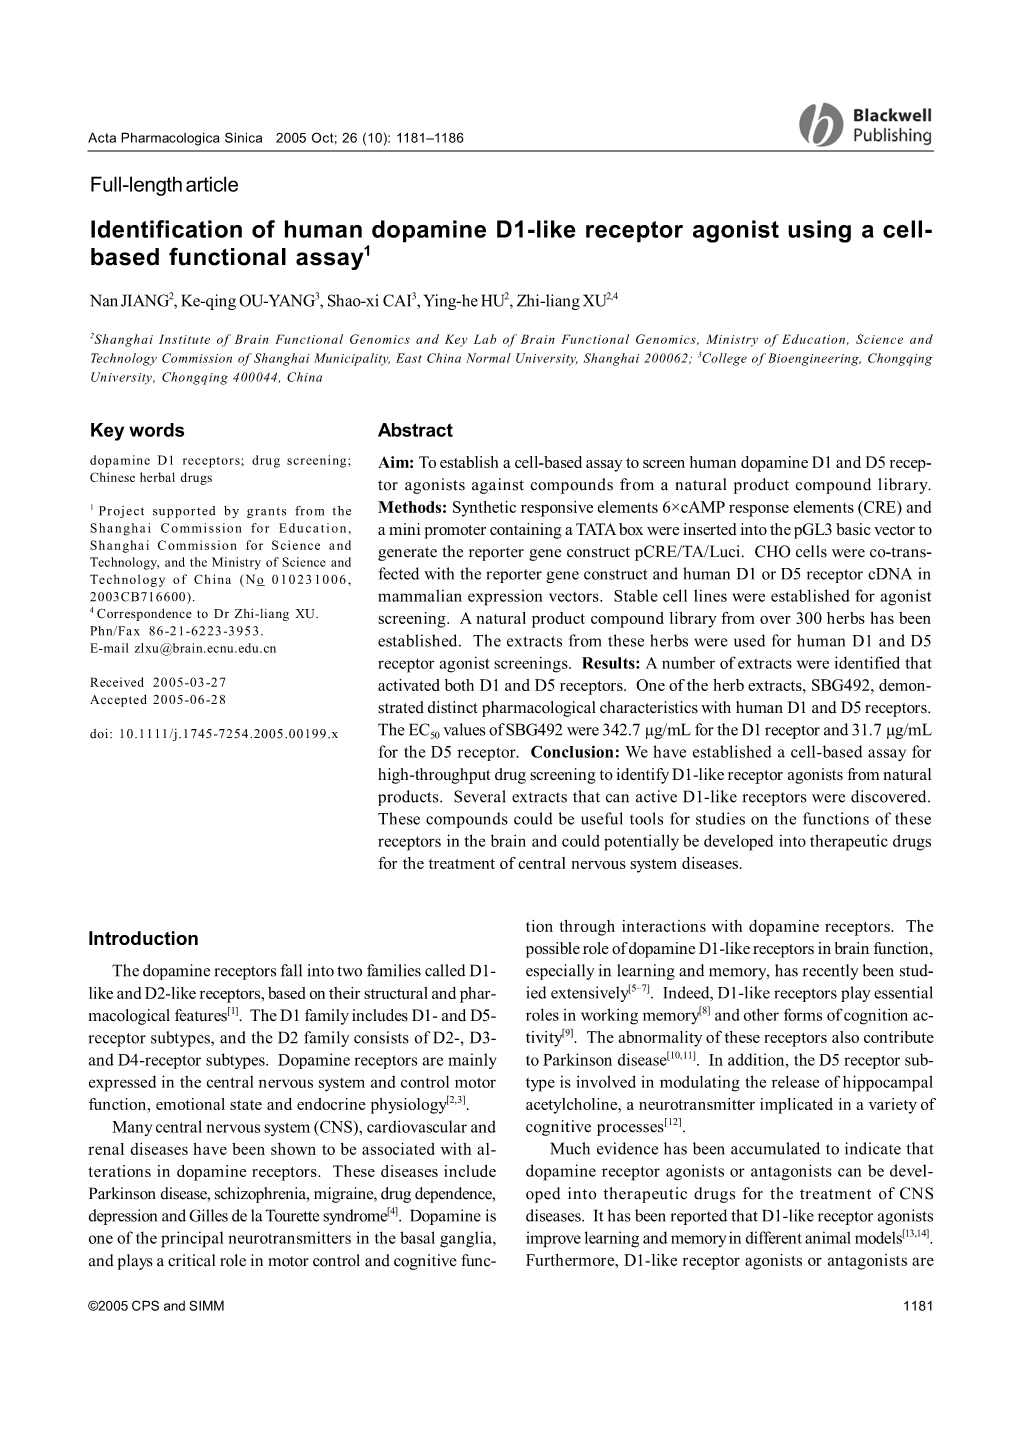 Identification of Human Dopamine D1-Like Receptor Agonist Using a Cell- Based Functional Assay1